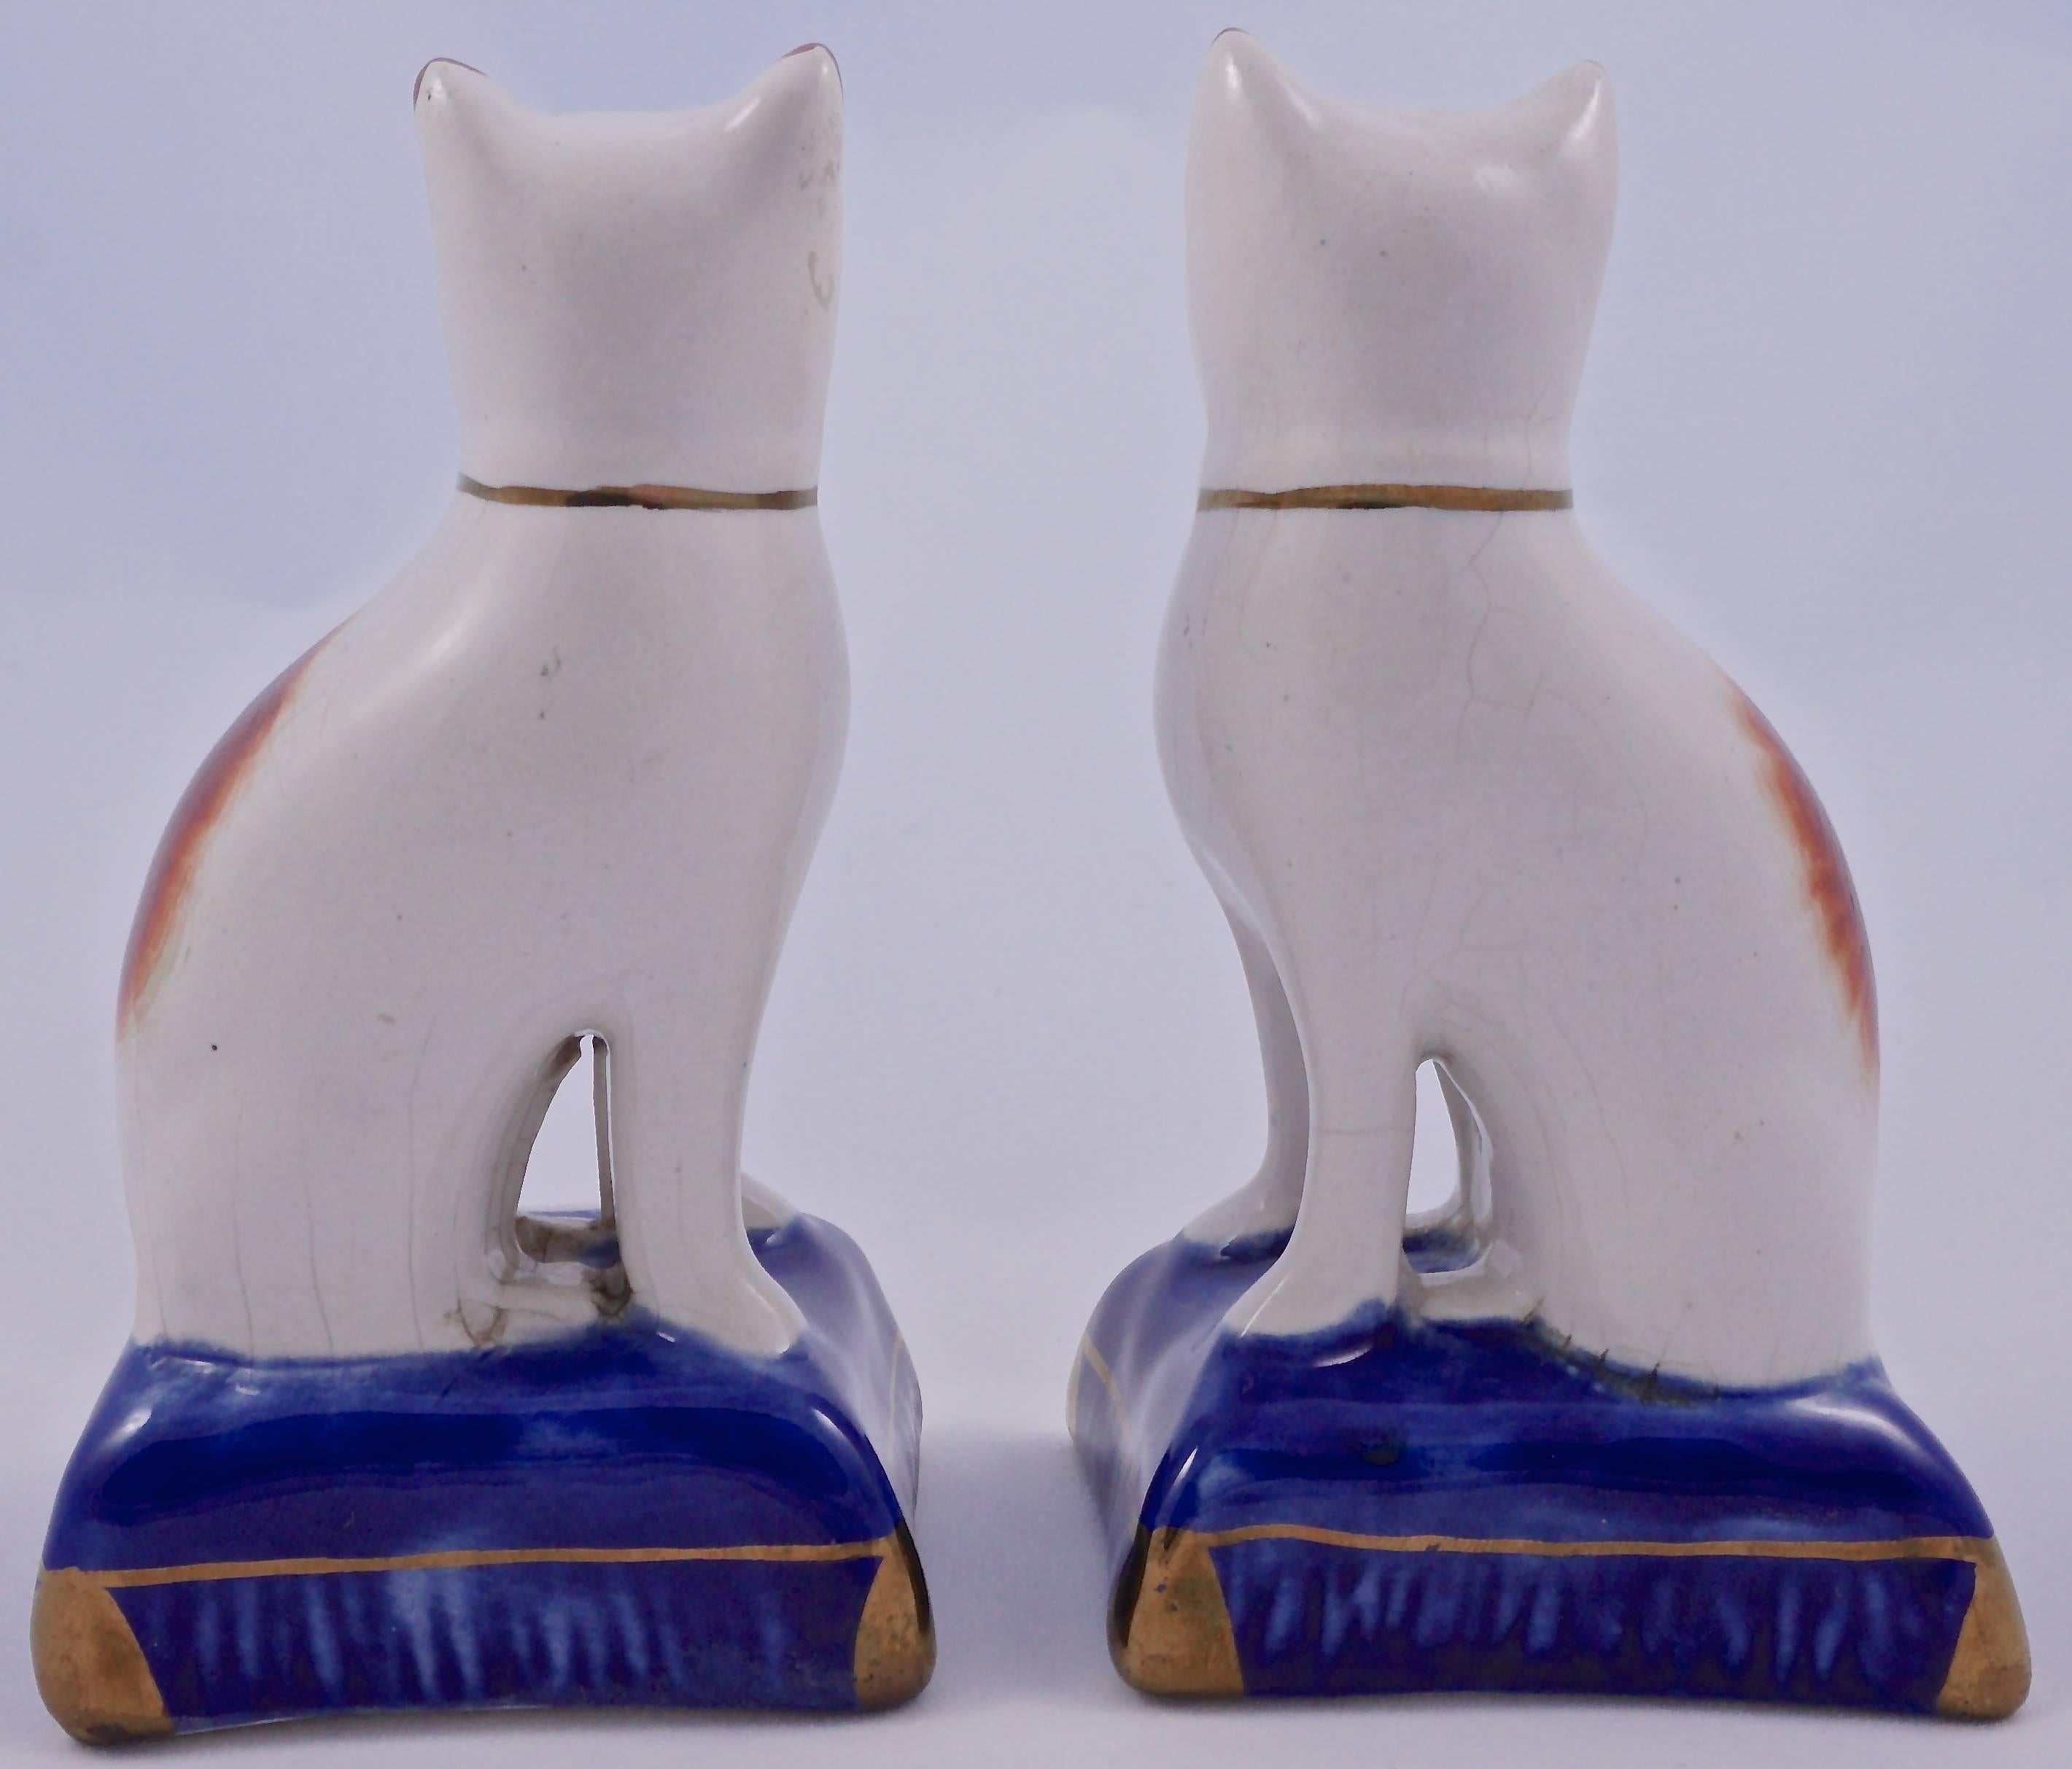 Pair of Staffordshire pottery hand painted cats, which look to be more modern. They are sitting on gold decorated cobalt blue cushions, and have tan decoration with golden bows. There is some minor crazing. The underneath has some very small blue